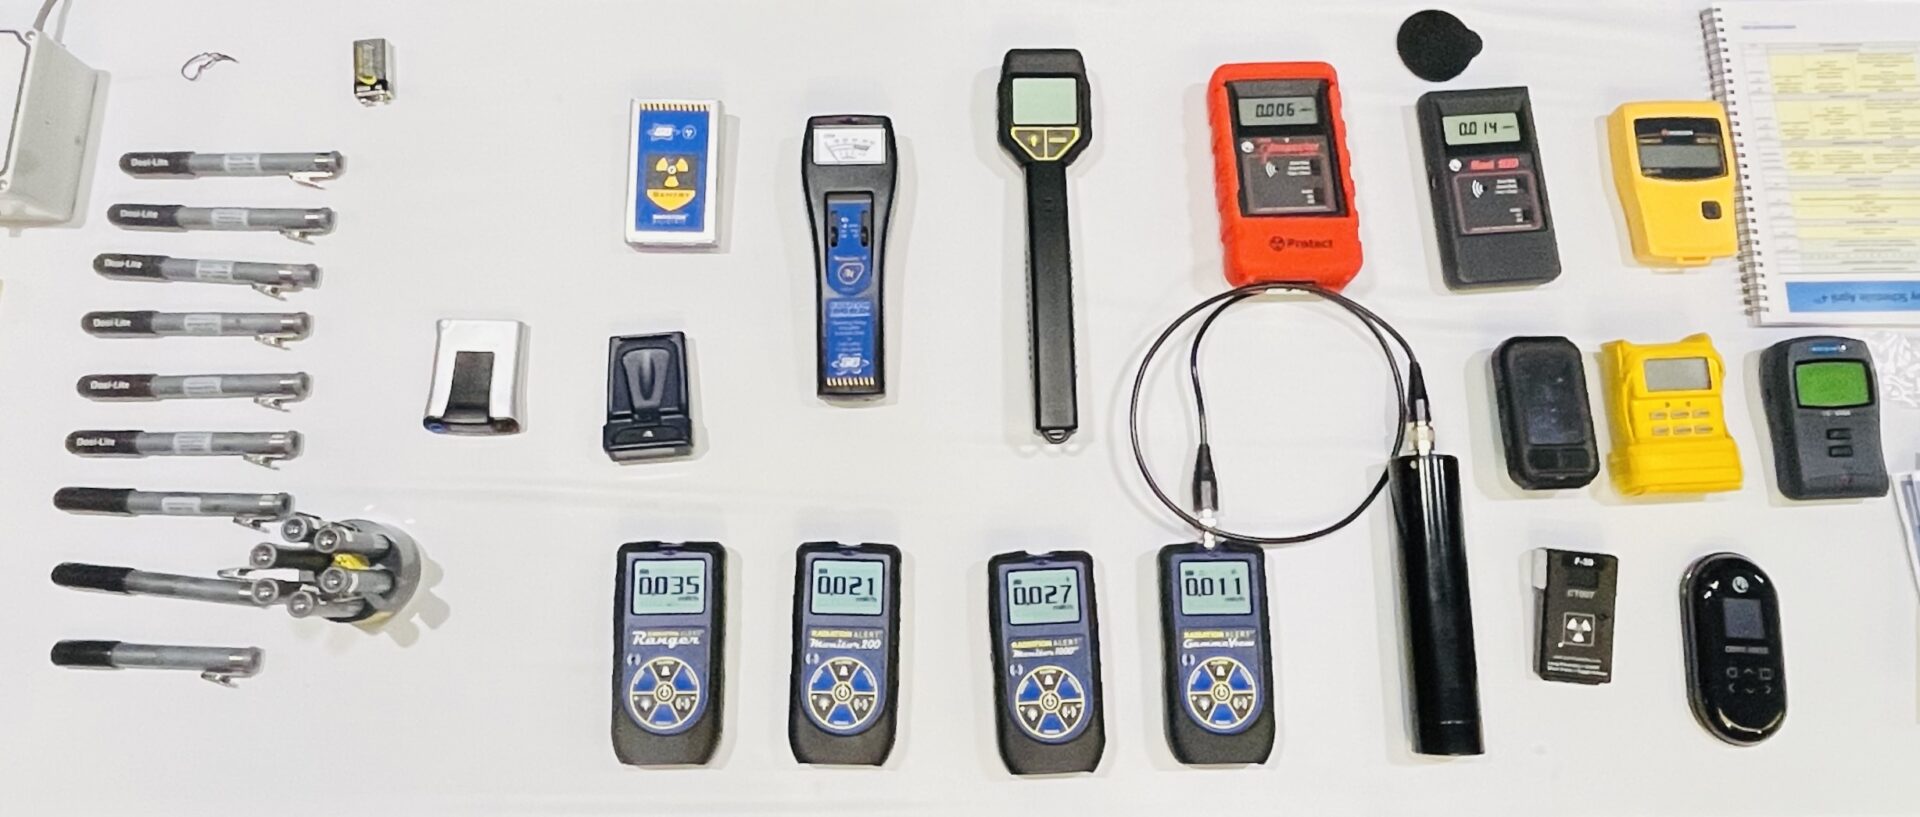 A diversity of dosimeters and other radiation detectors was on offer from multiple vendors at the 2023 NREP conference, alongside drones and other equipment for radiological emergencies.